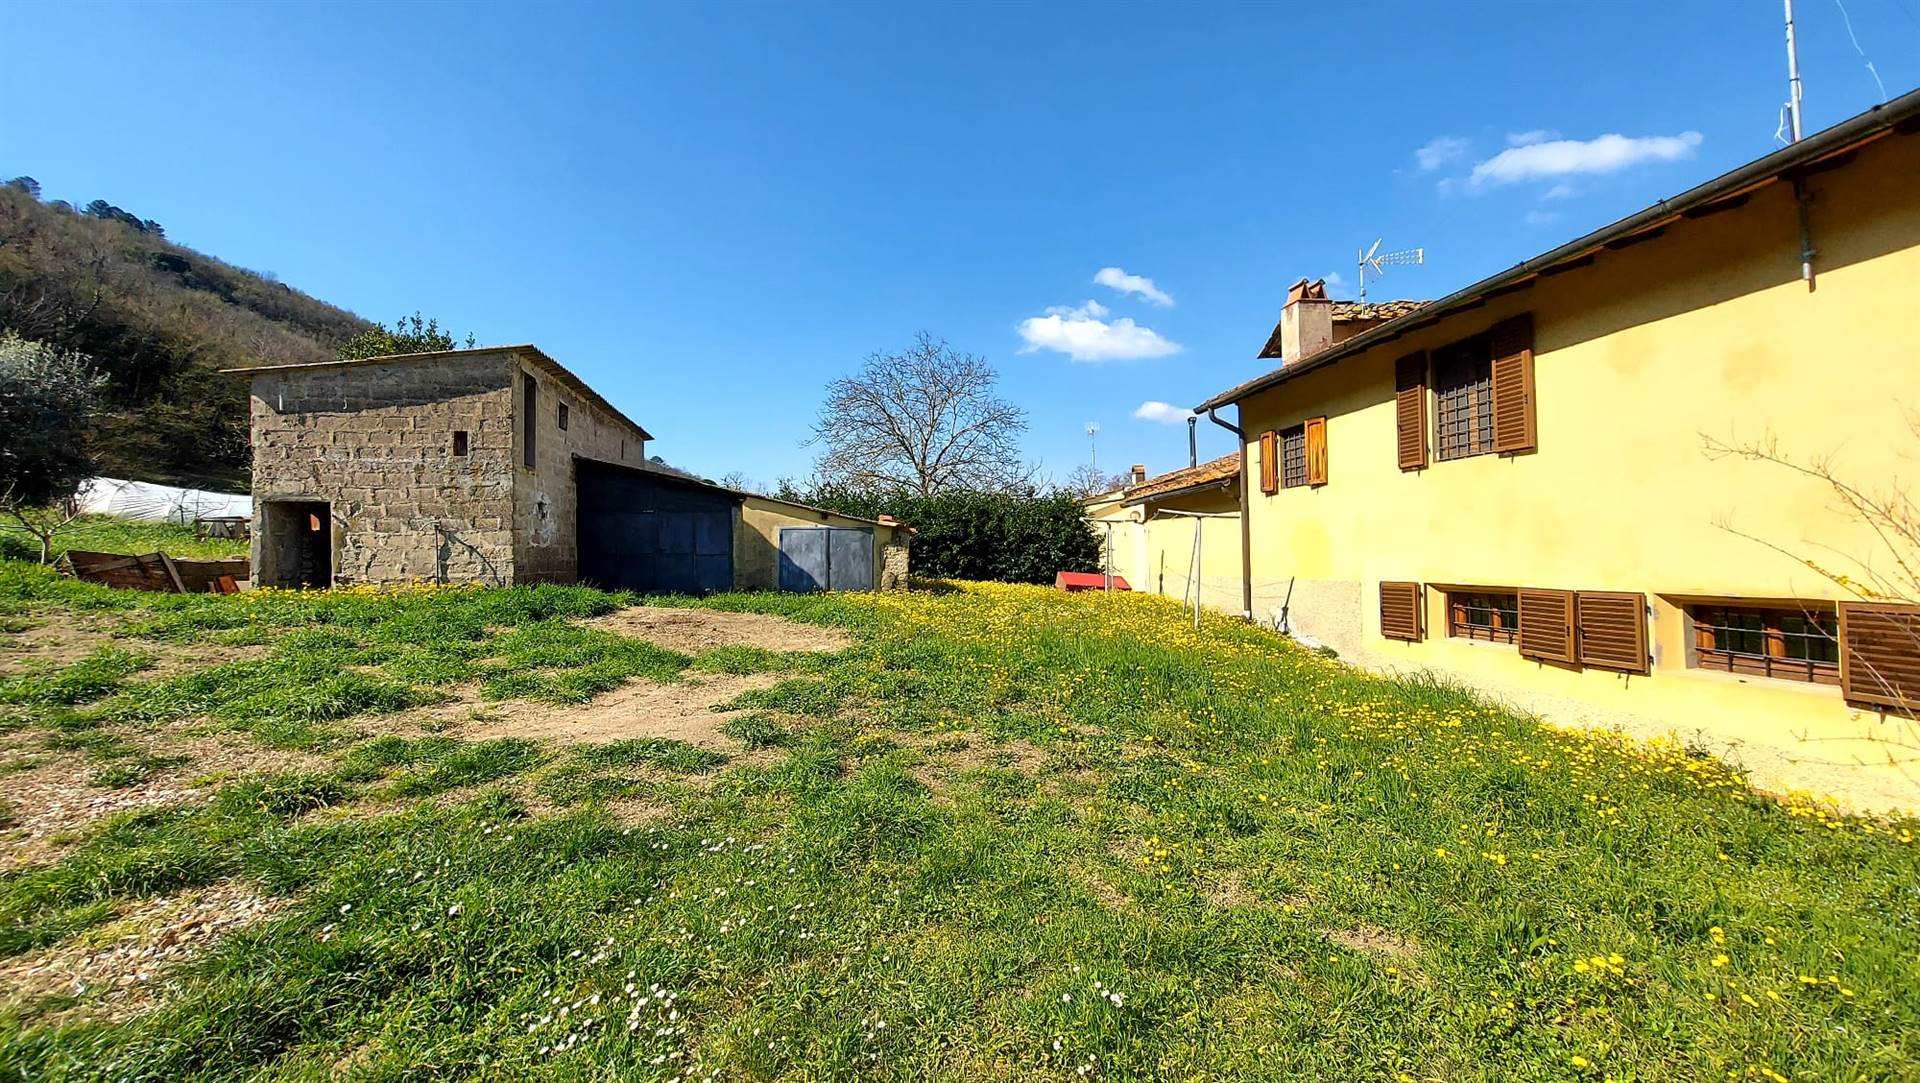 GUALCHIERE DI REMOLE, BAGNO A RIPOLI, Farmhouse for sale of 430 Sq. mt., Habitable, Heating Individual heating system, Energetic class: G, Epi: 230 